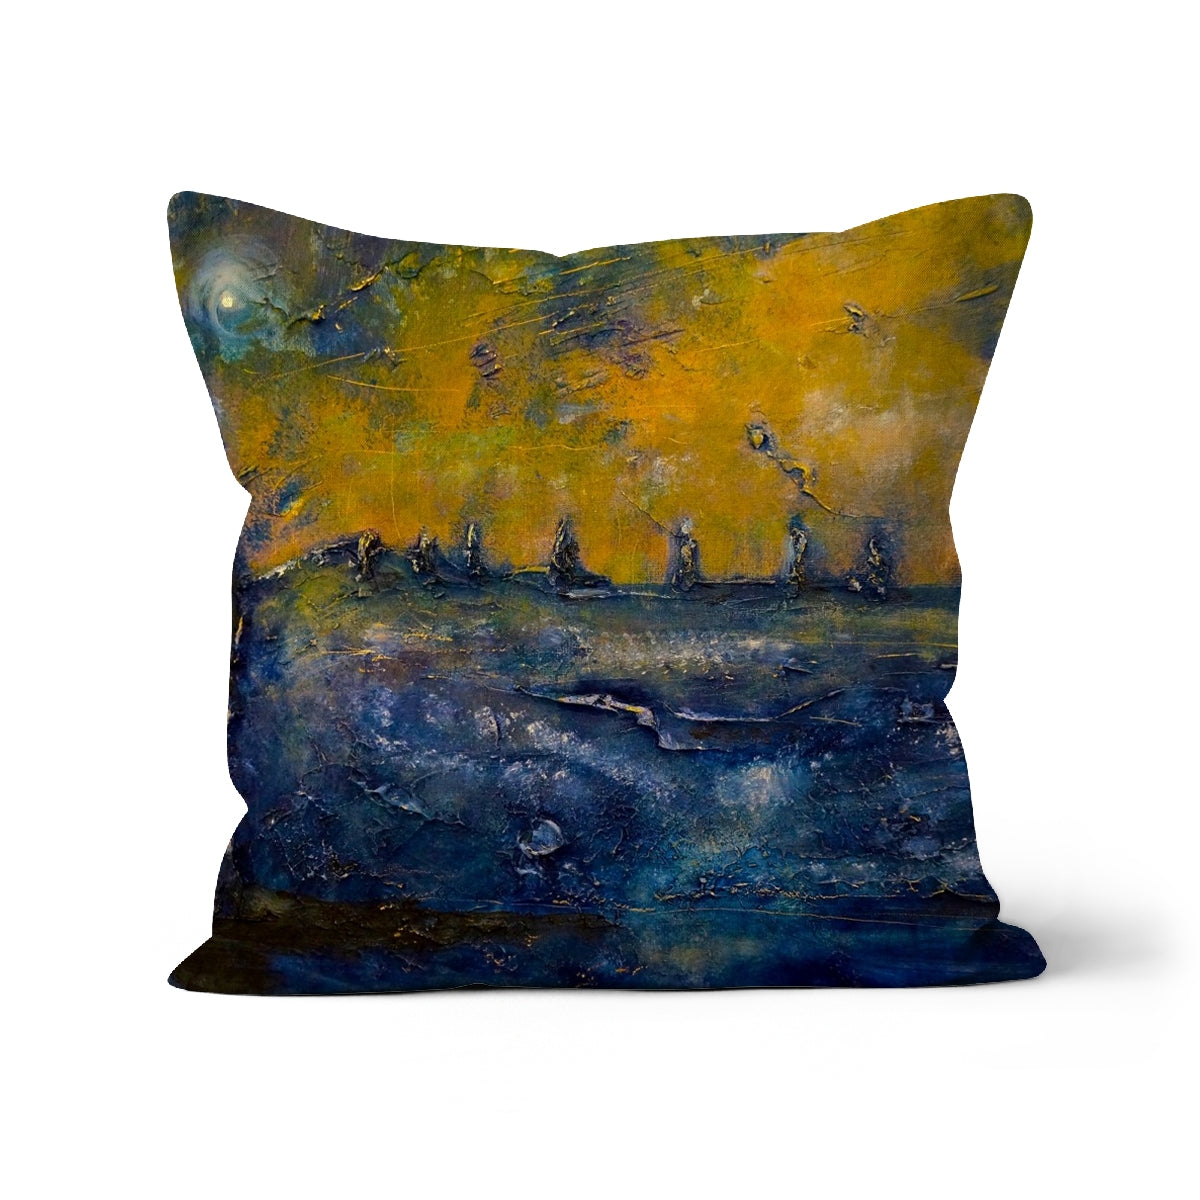 Brodgar Moonlight Orkney Art Gifts Cushion-Cushions-Orkney Art Gallery-Linen-22"x22"-Paintings, Prints, Homeware, Art Gifts From Scotland By Scottish Artist Kevin Hunter